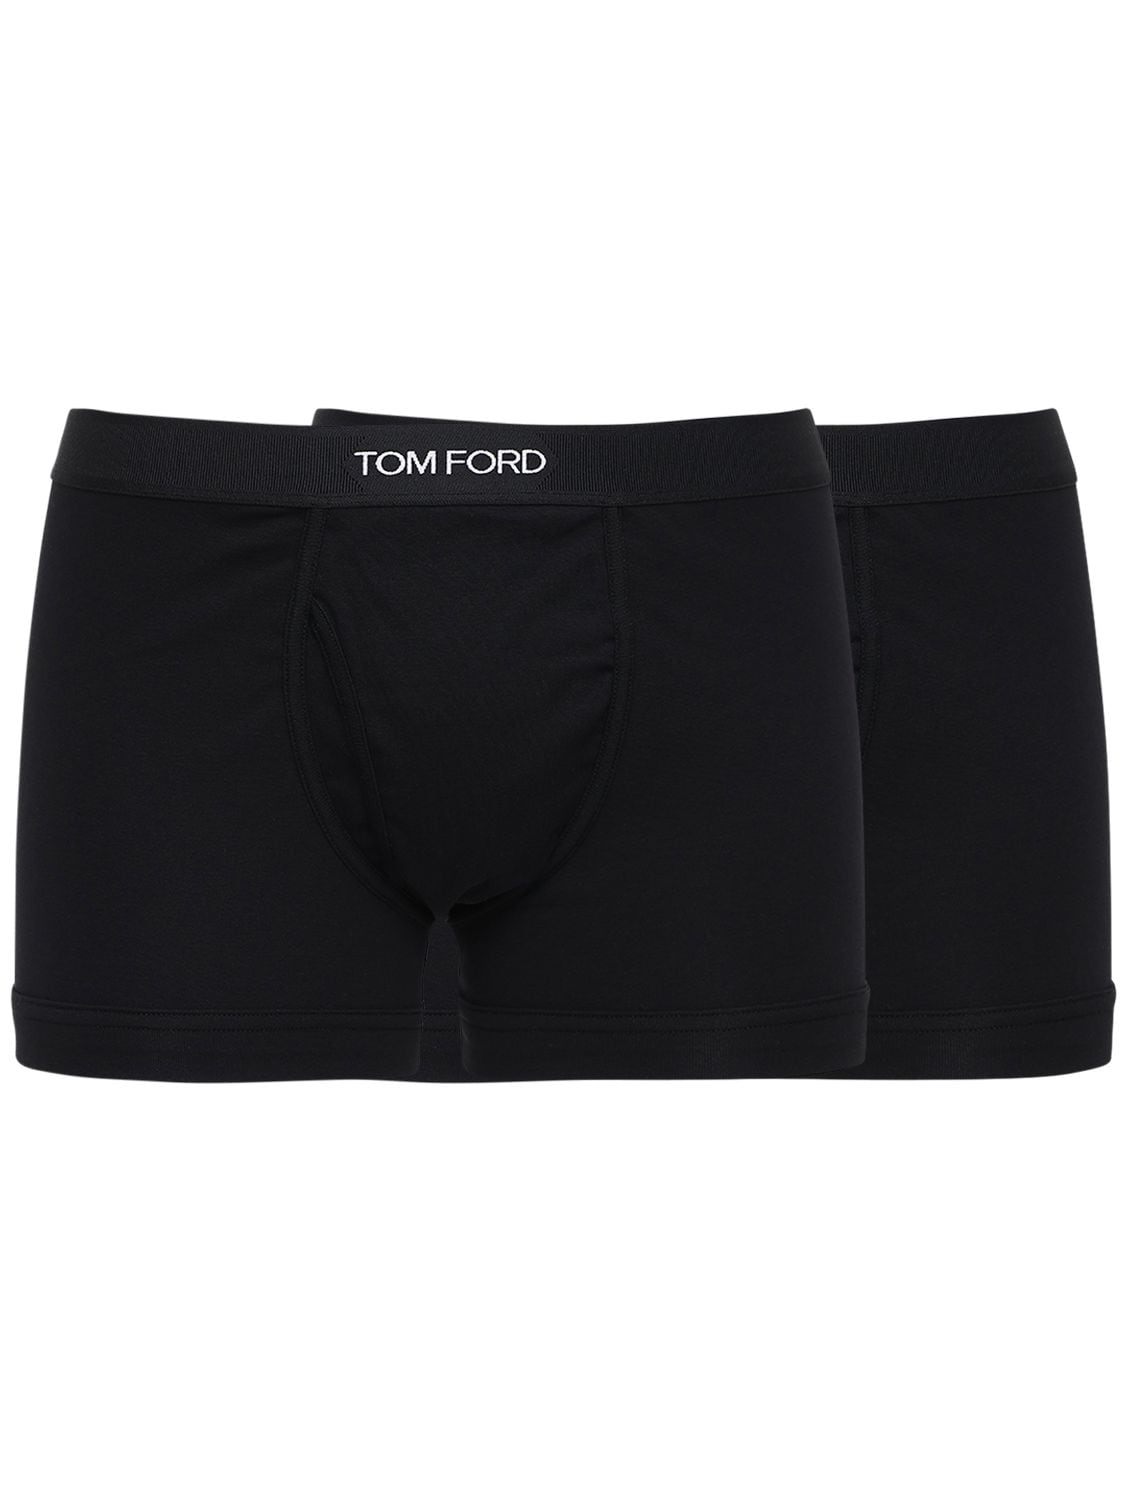 TOM FORD Two-Pack Stretch Cotton and Modal-Blend Briefs for Men